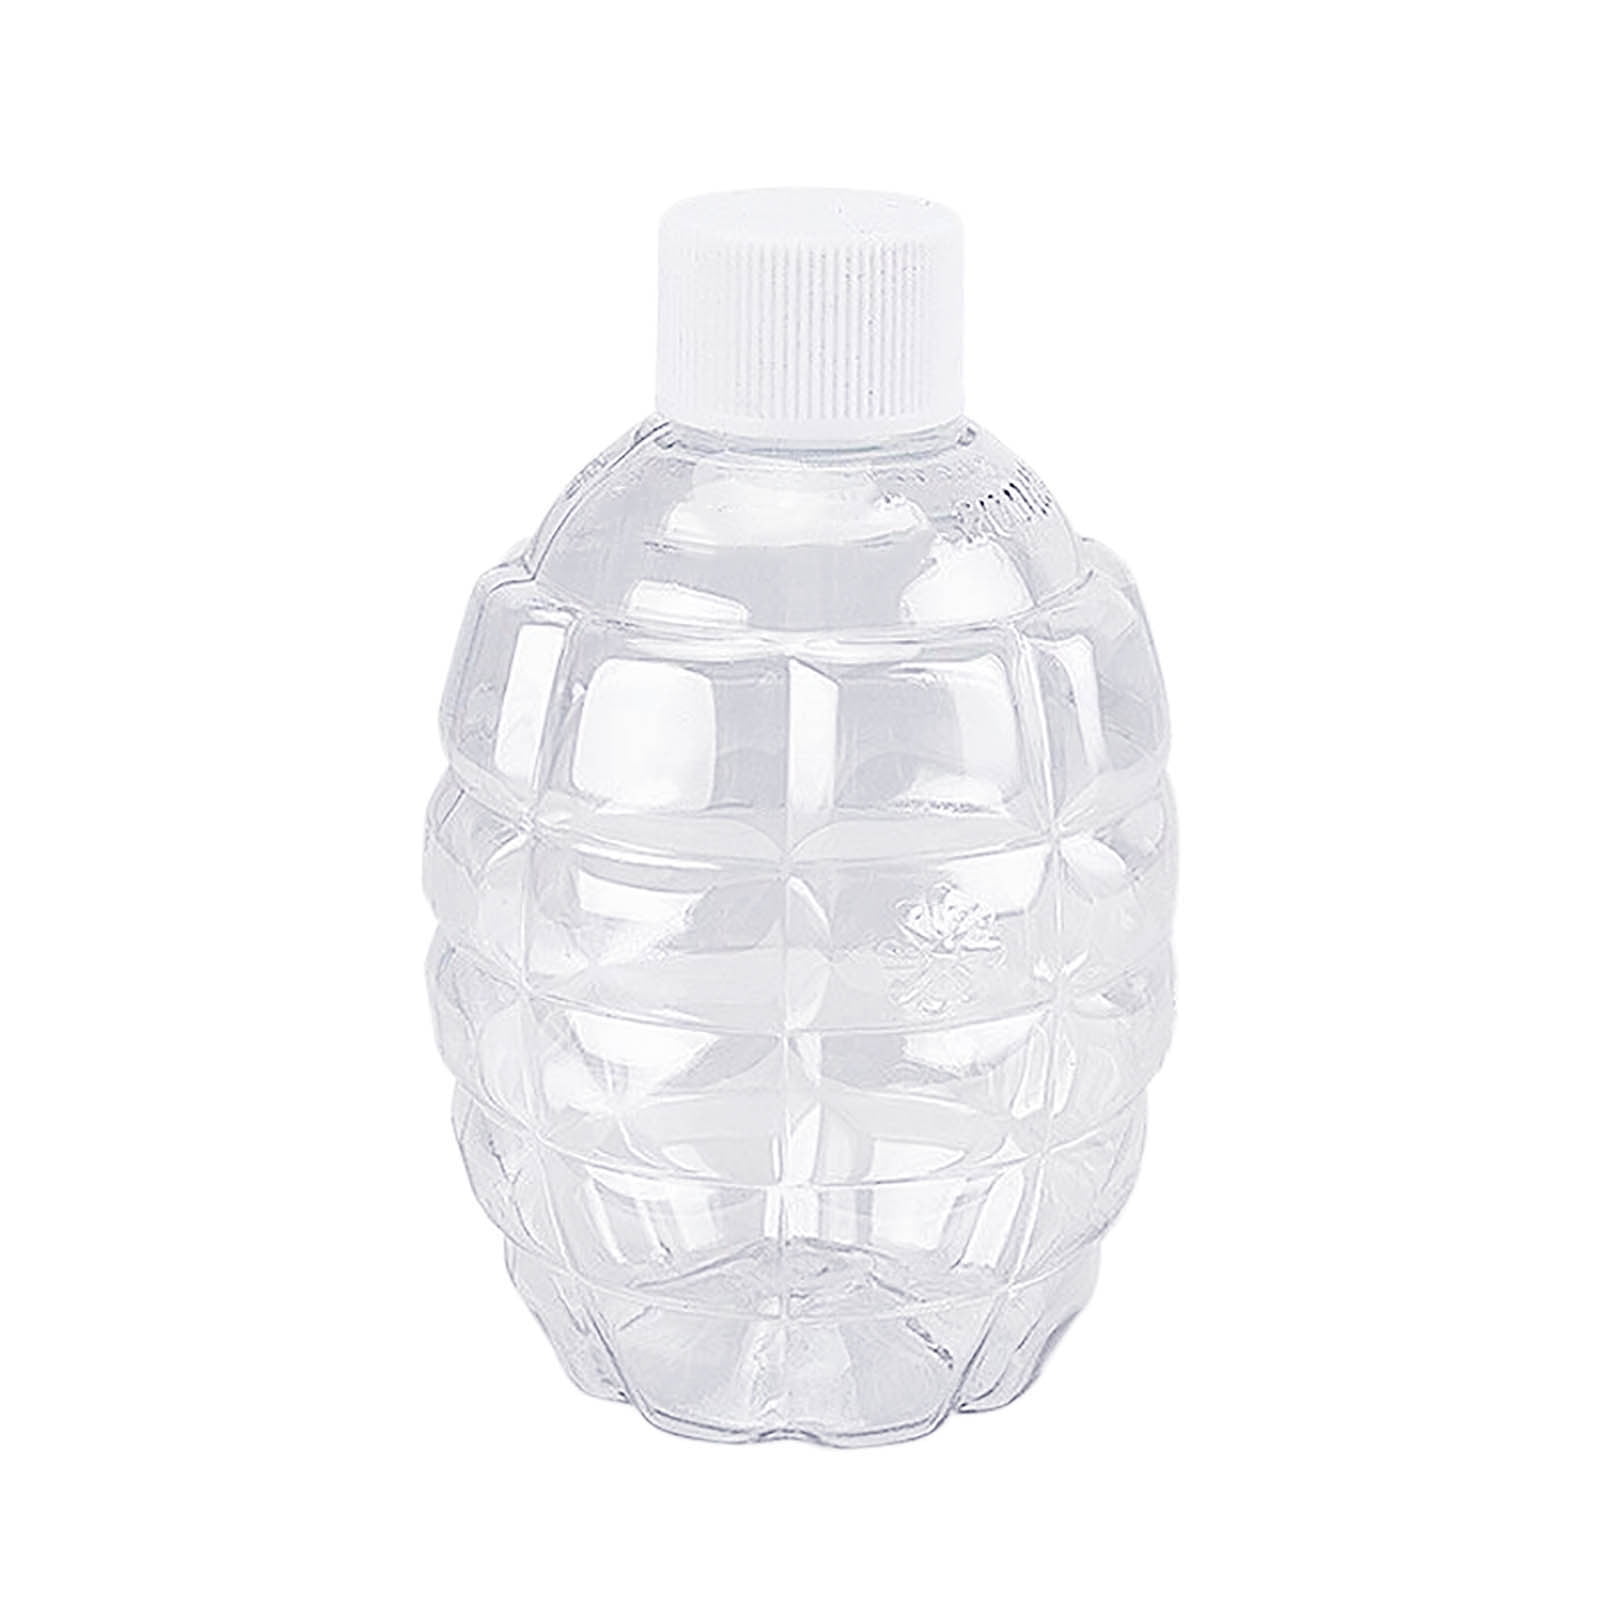 Bead Gel Plastic Gel Game for Boys Bottle Subpackage Accessories Bottle  Outdoor Water Water Pineapple Bead Girls and for Gel Arts & Arts and Crafts